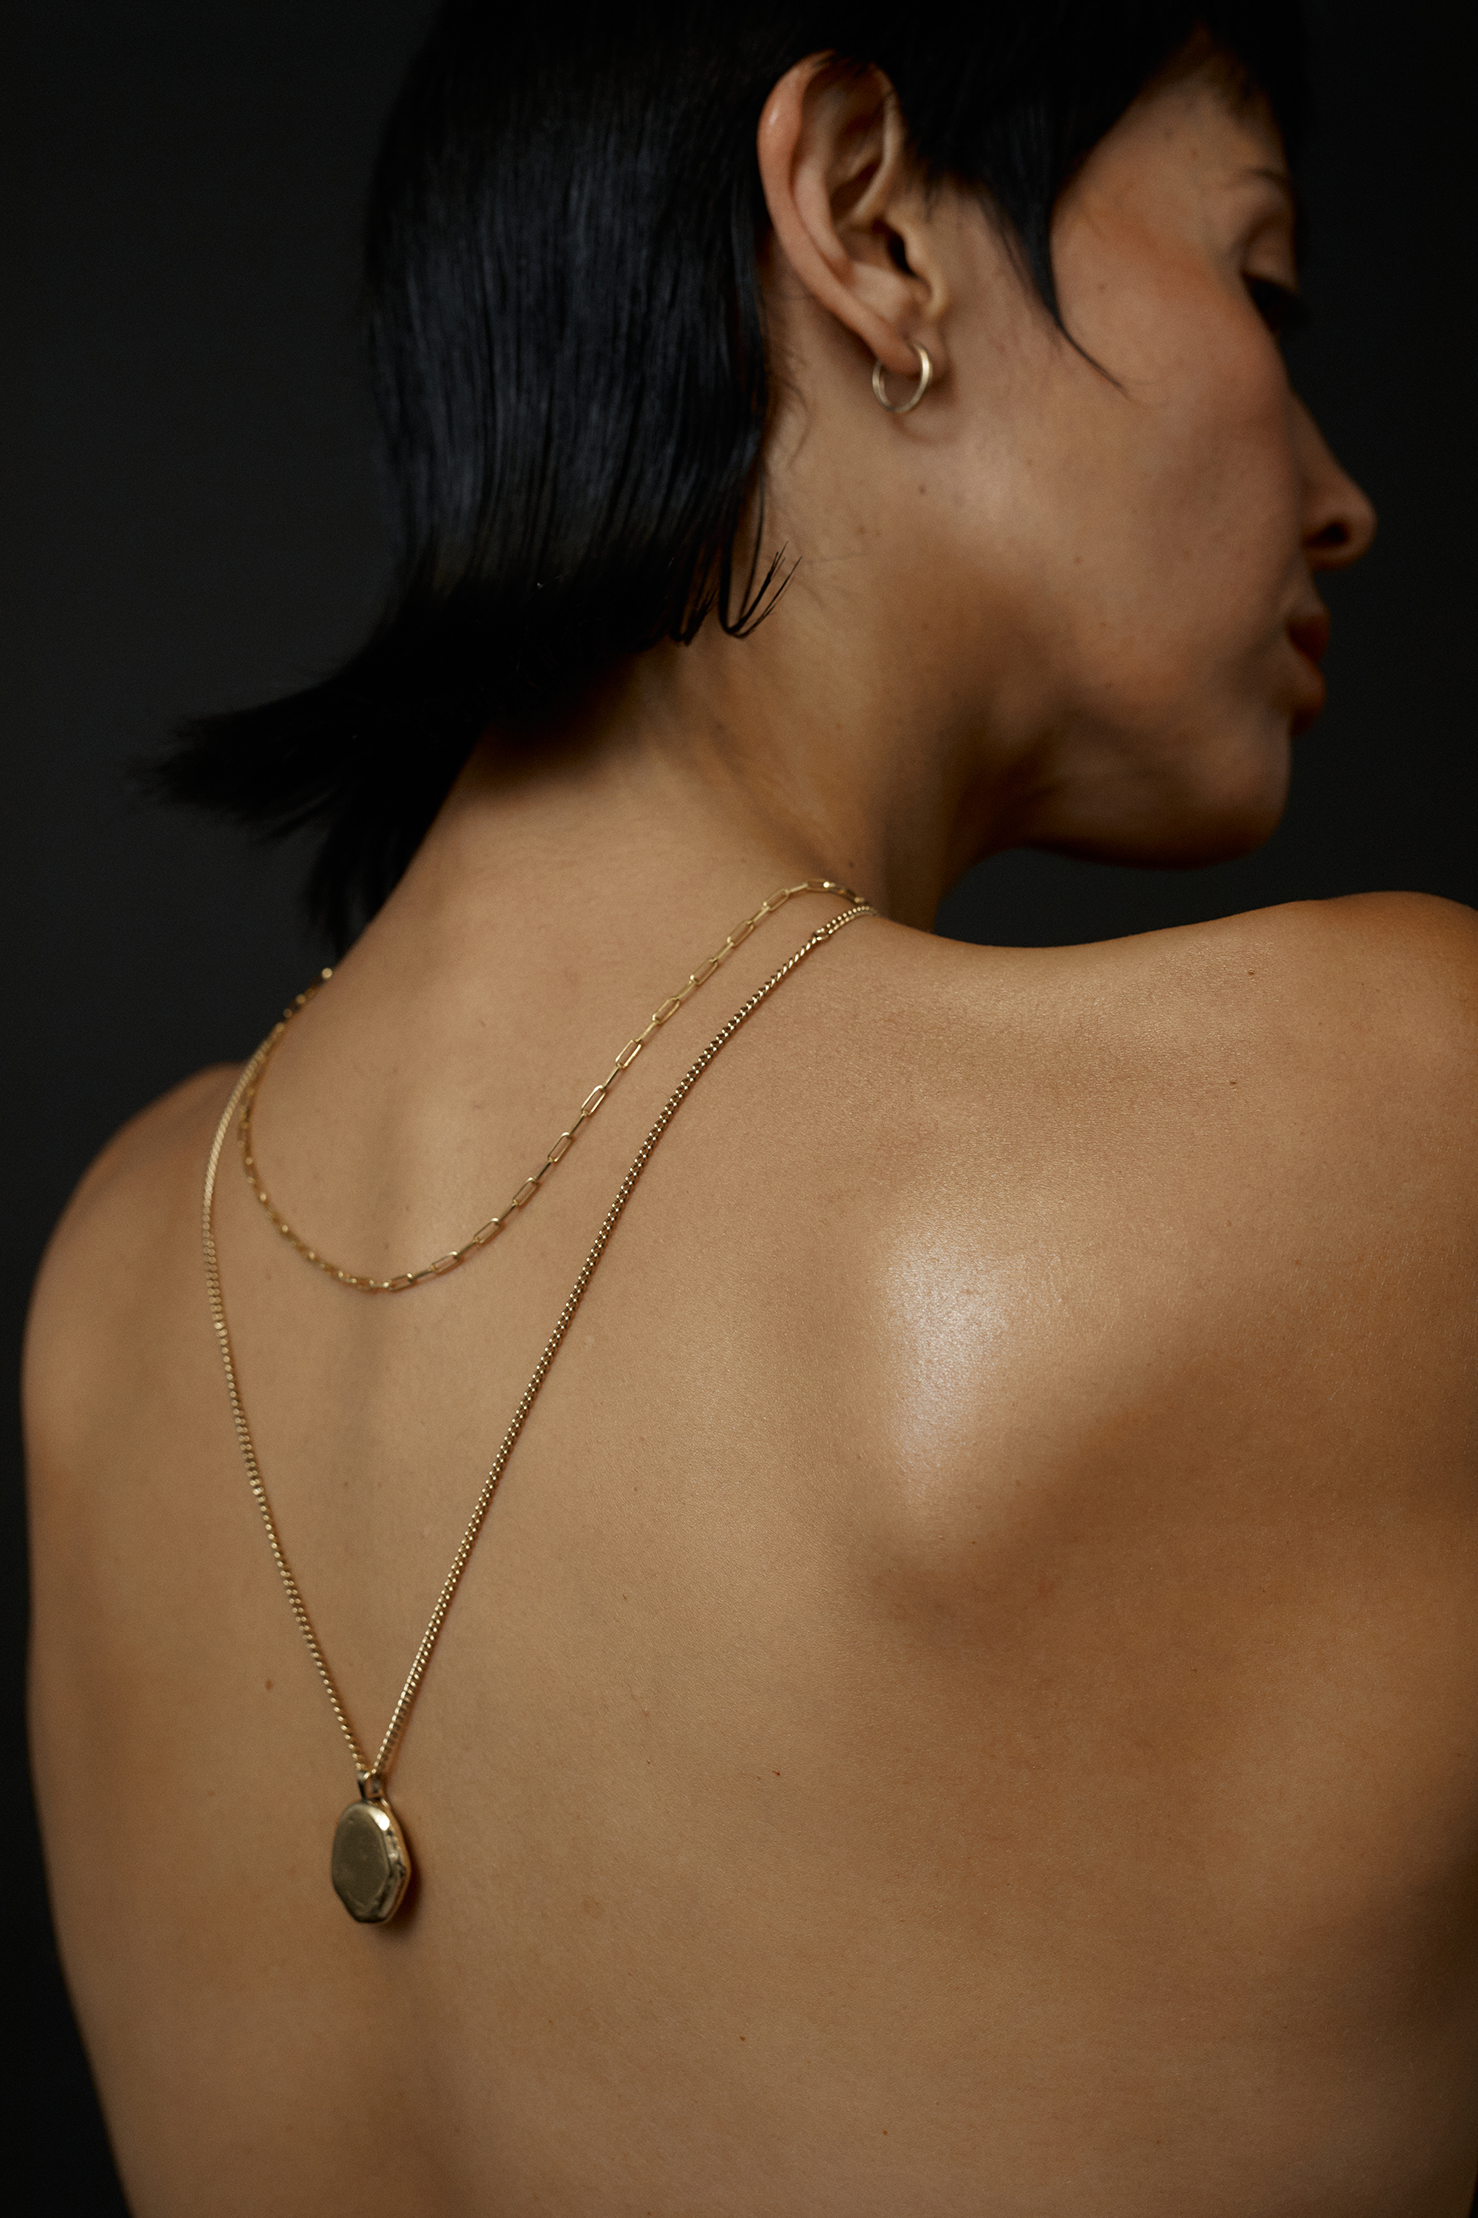 THE OTHER SIDE | Ilsa Molten Necklace | $189